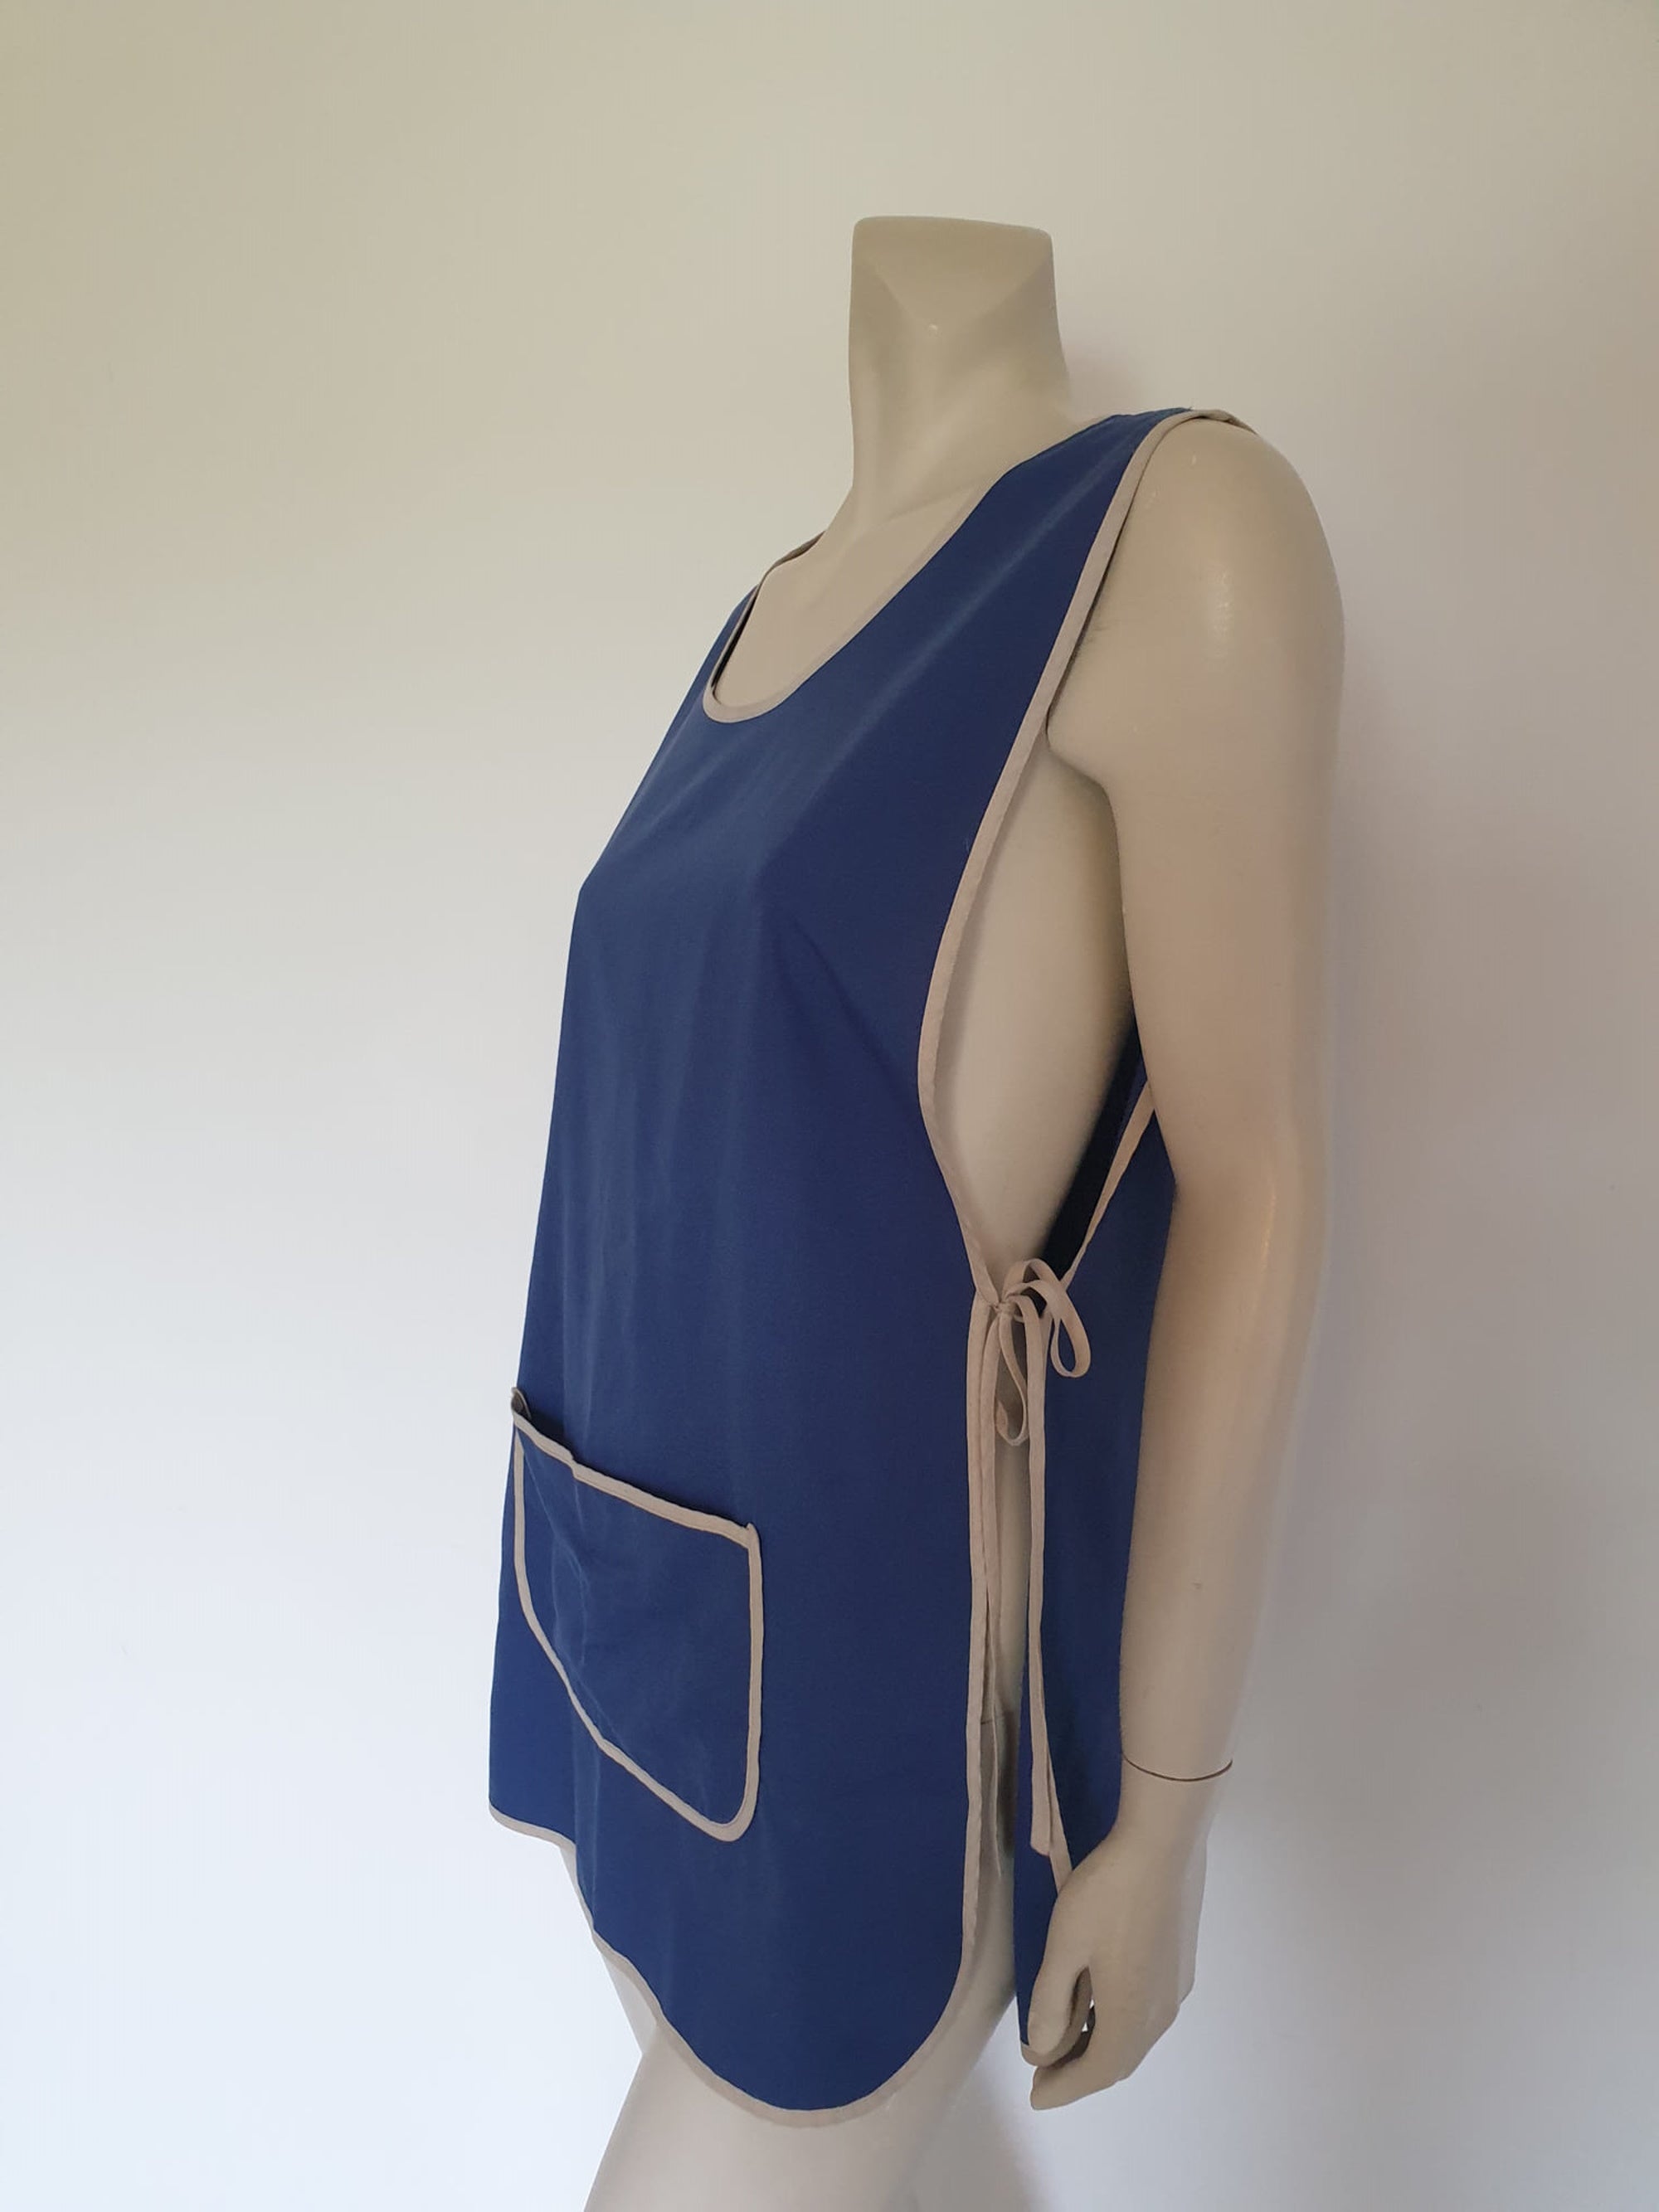 1970s 1980s vintage blue pinafore pinny style apron